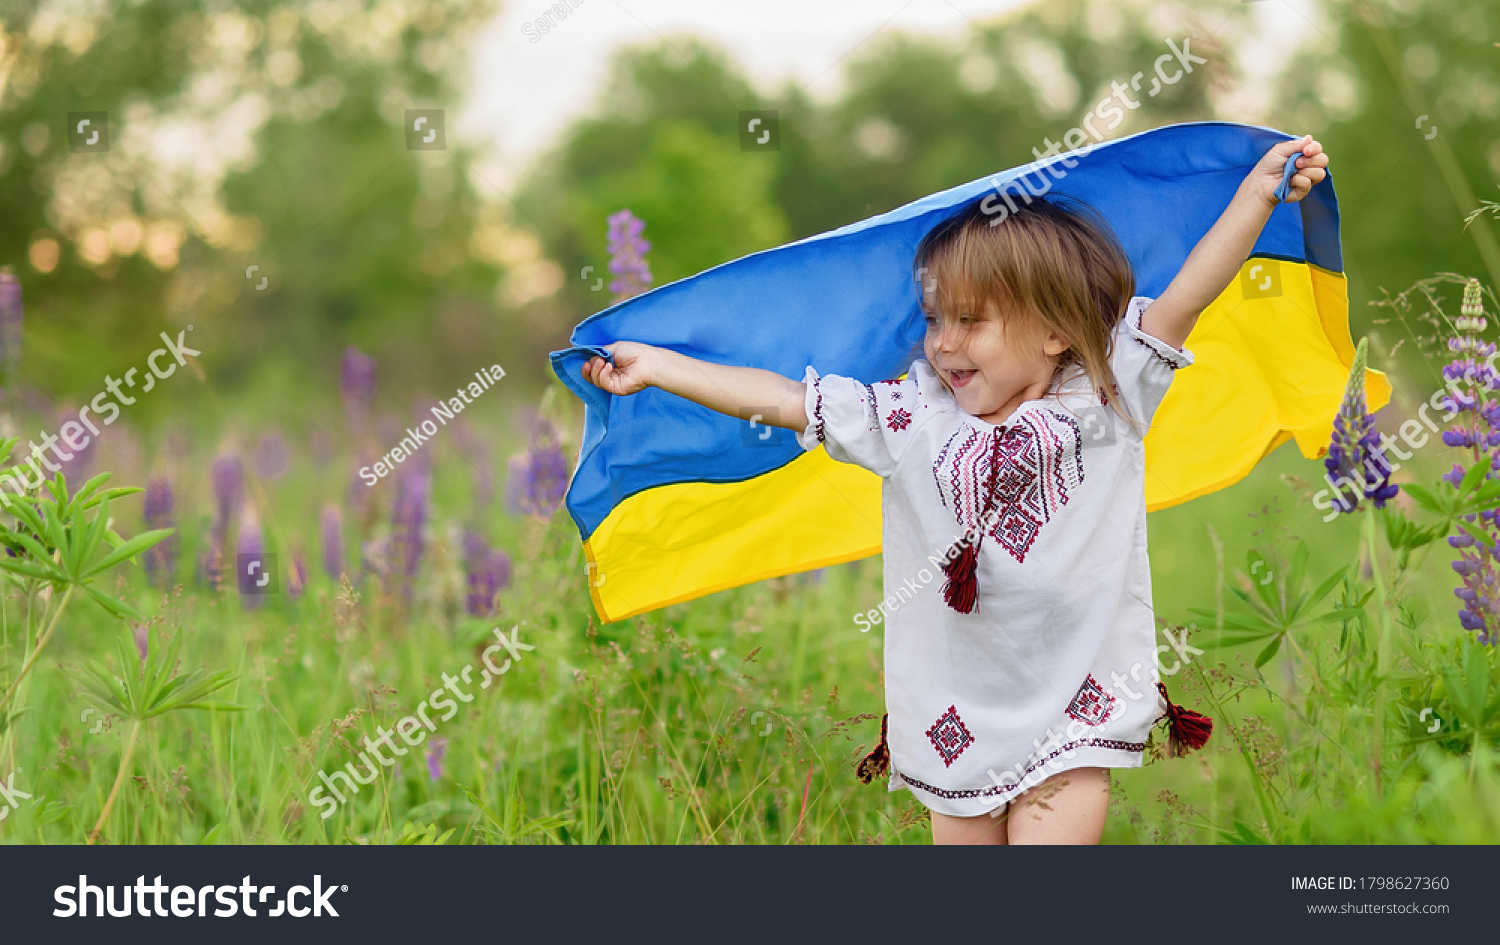 Ukraine's Independence Flag Day. Constitution day. 24 August. Patriotic holiday. Girl in traditional embroidery with flag of Ukraine. Child carries fluttering blue and yellow flag of Ukraine in field. #1798627360